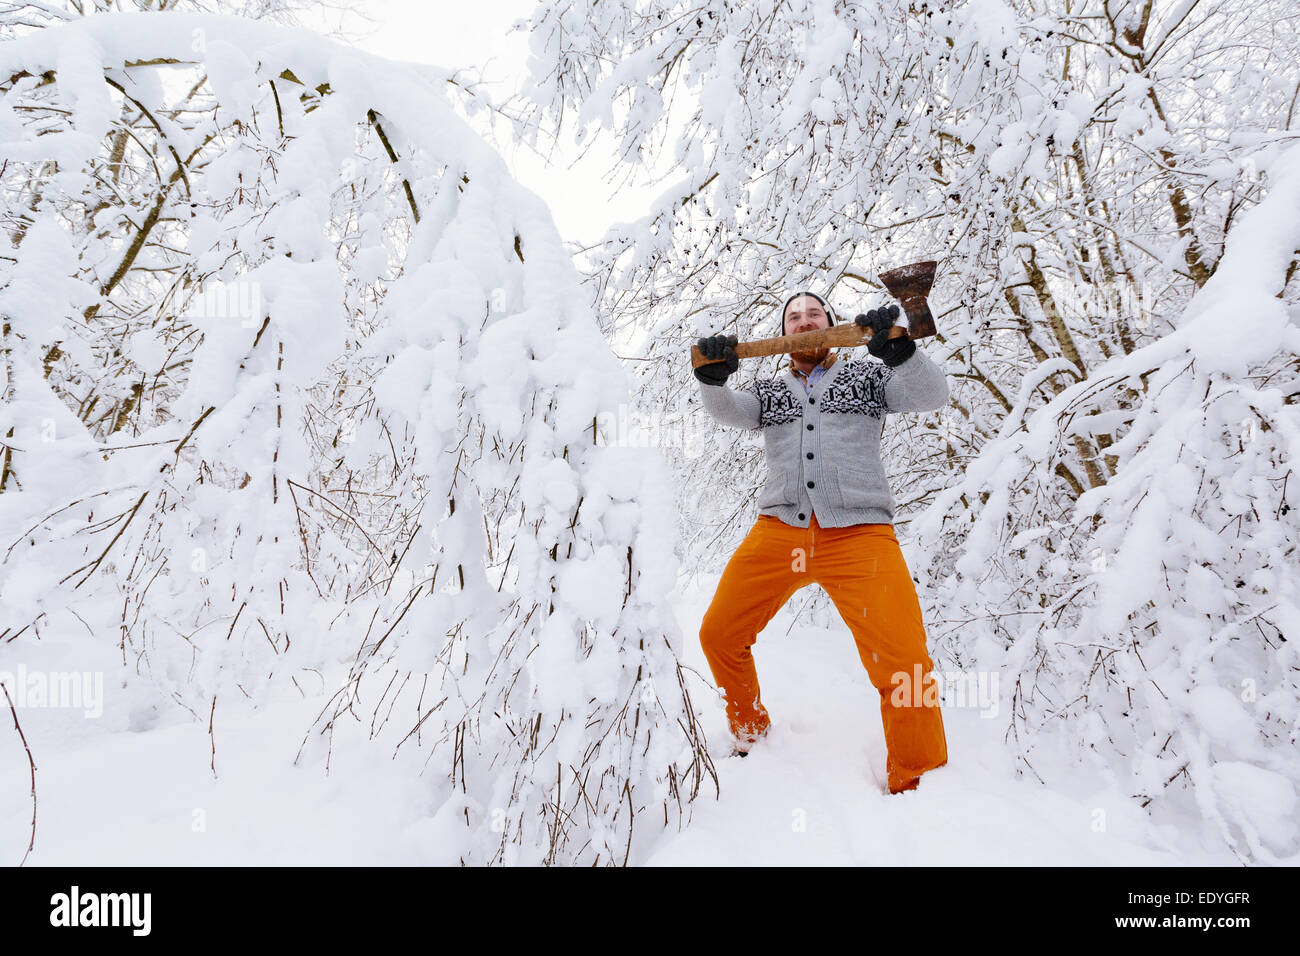 Lumberjack in the snowy winter forest Stock Photo